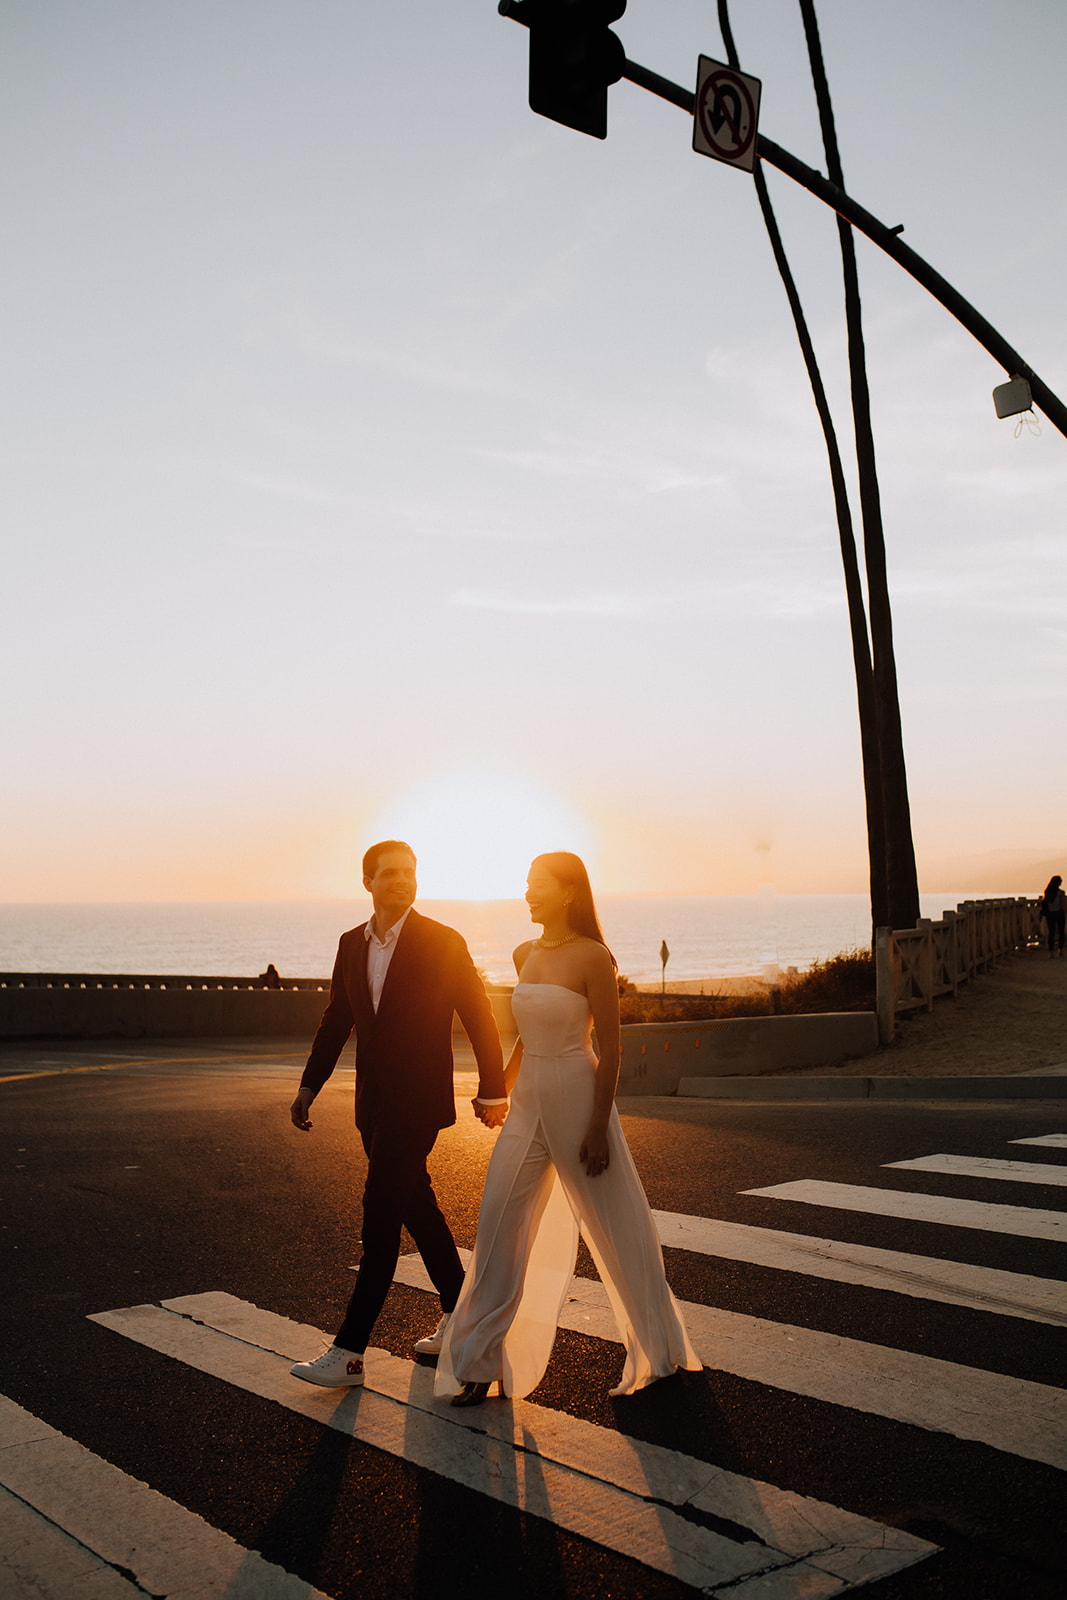 stunning couple walk together with the beautiful West Coast sunset in the background